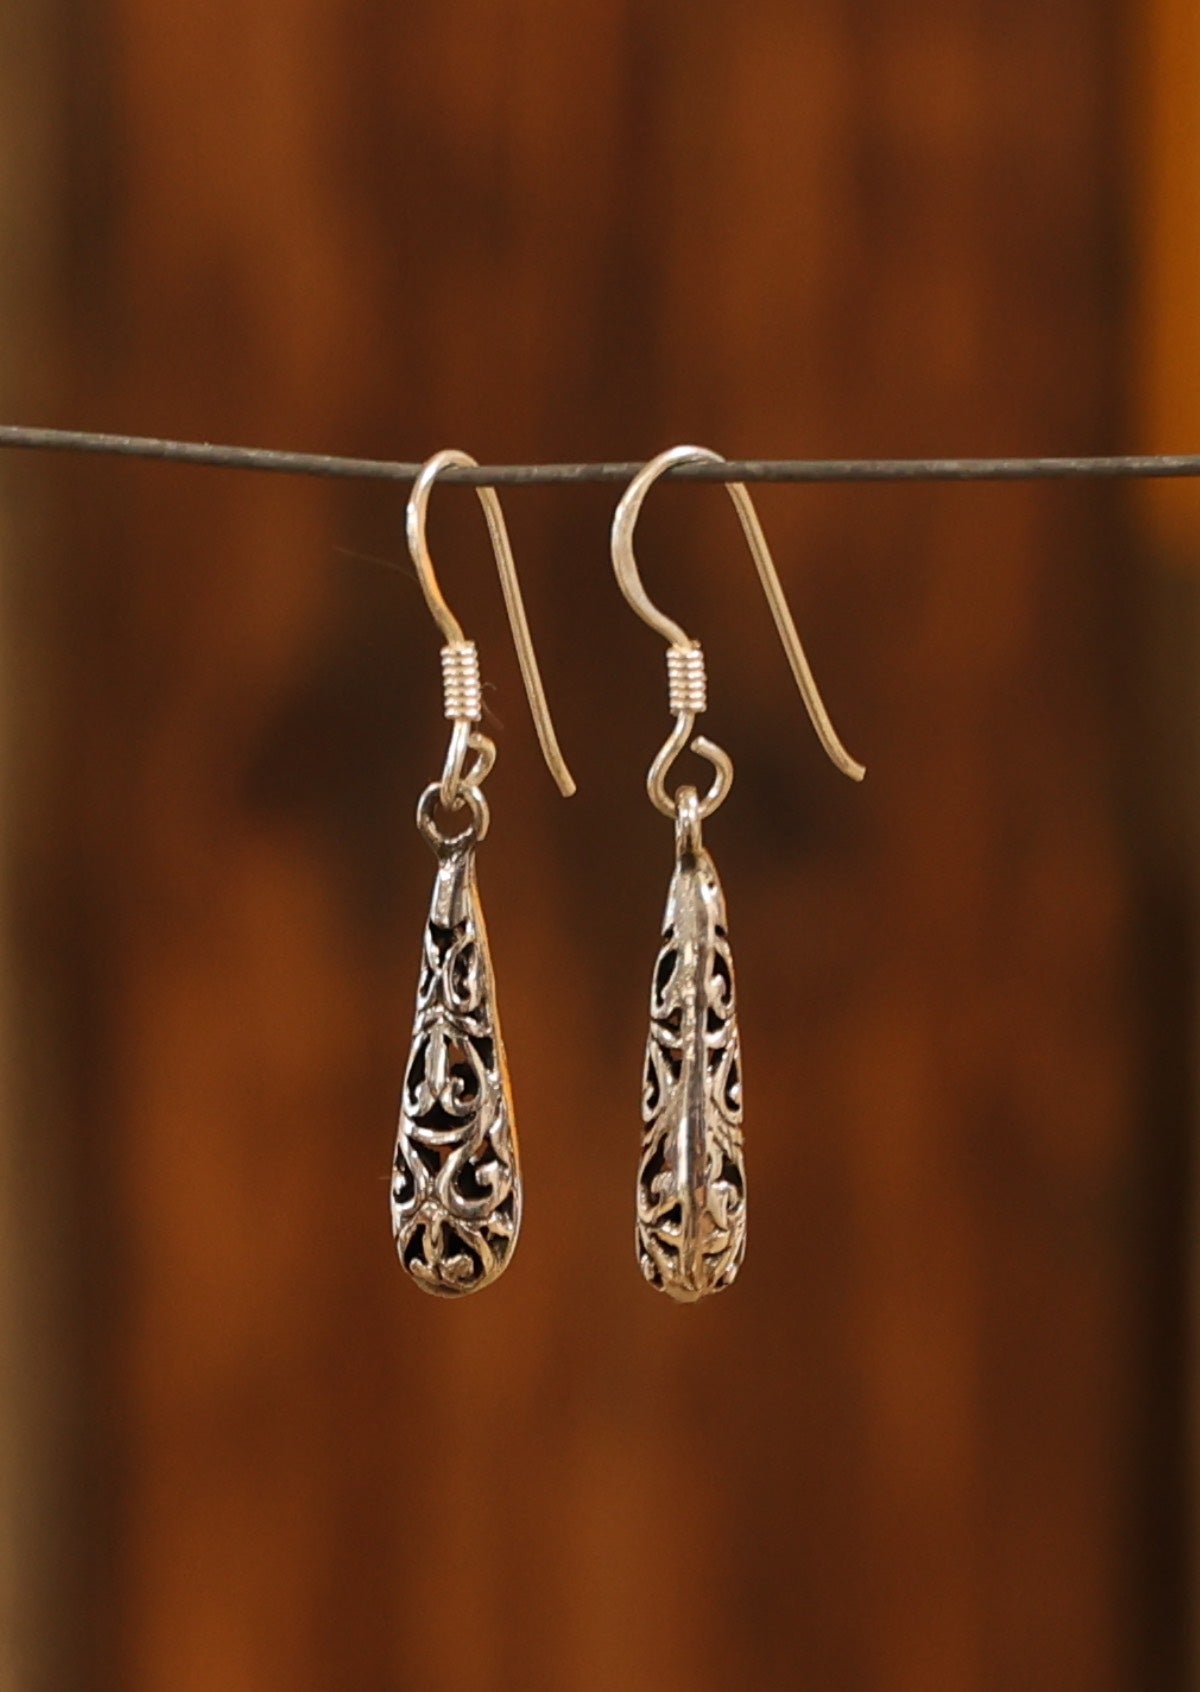 Teardrop shape with ornate details suspended from wire hook